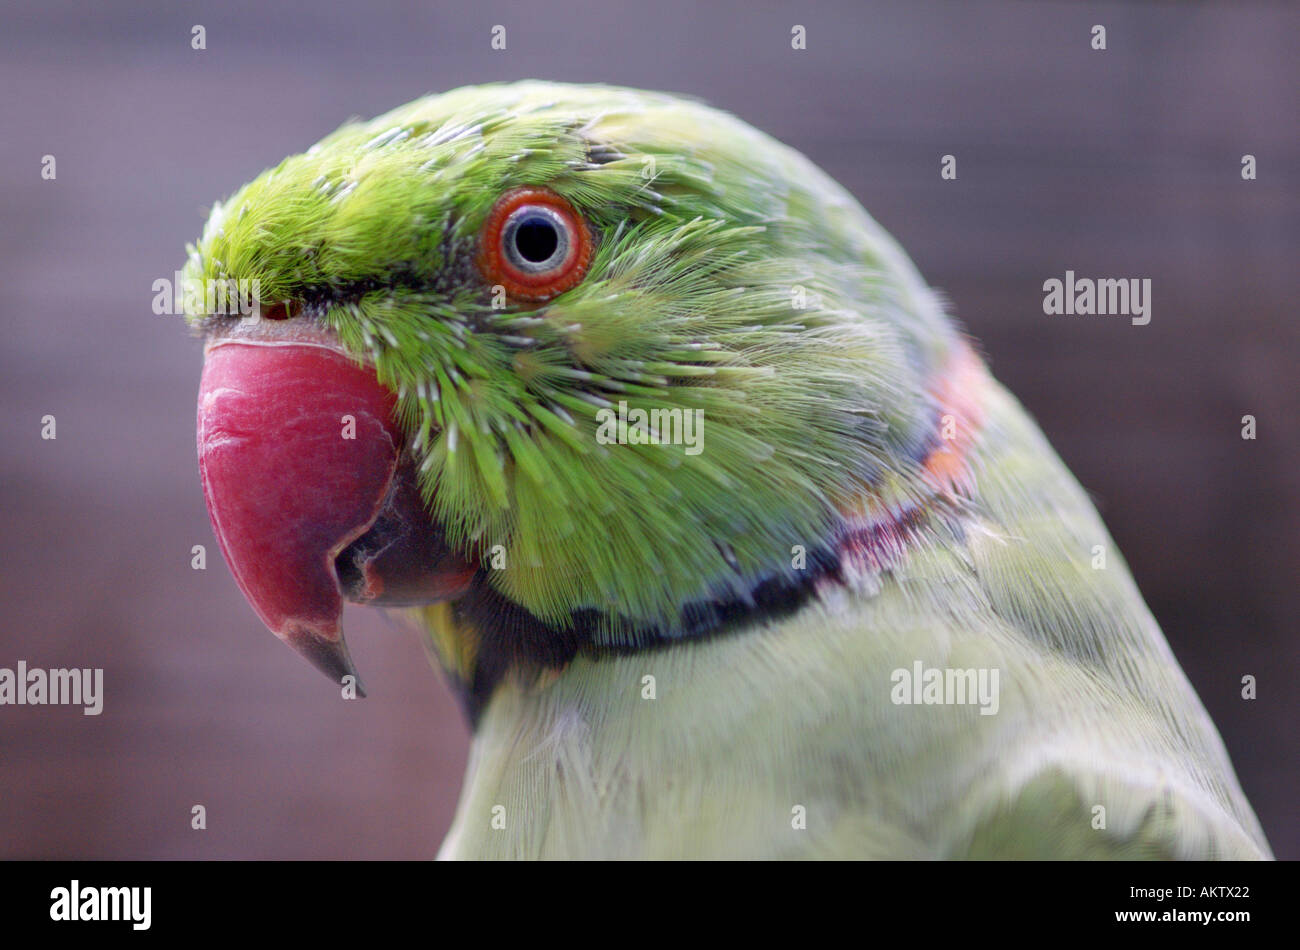 portrait of a green parrot Stock Photo